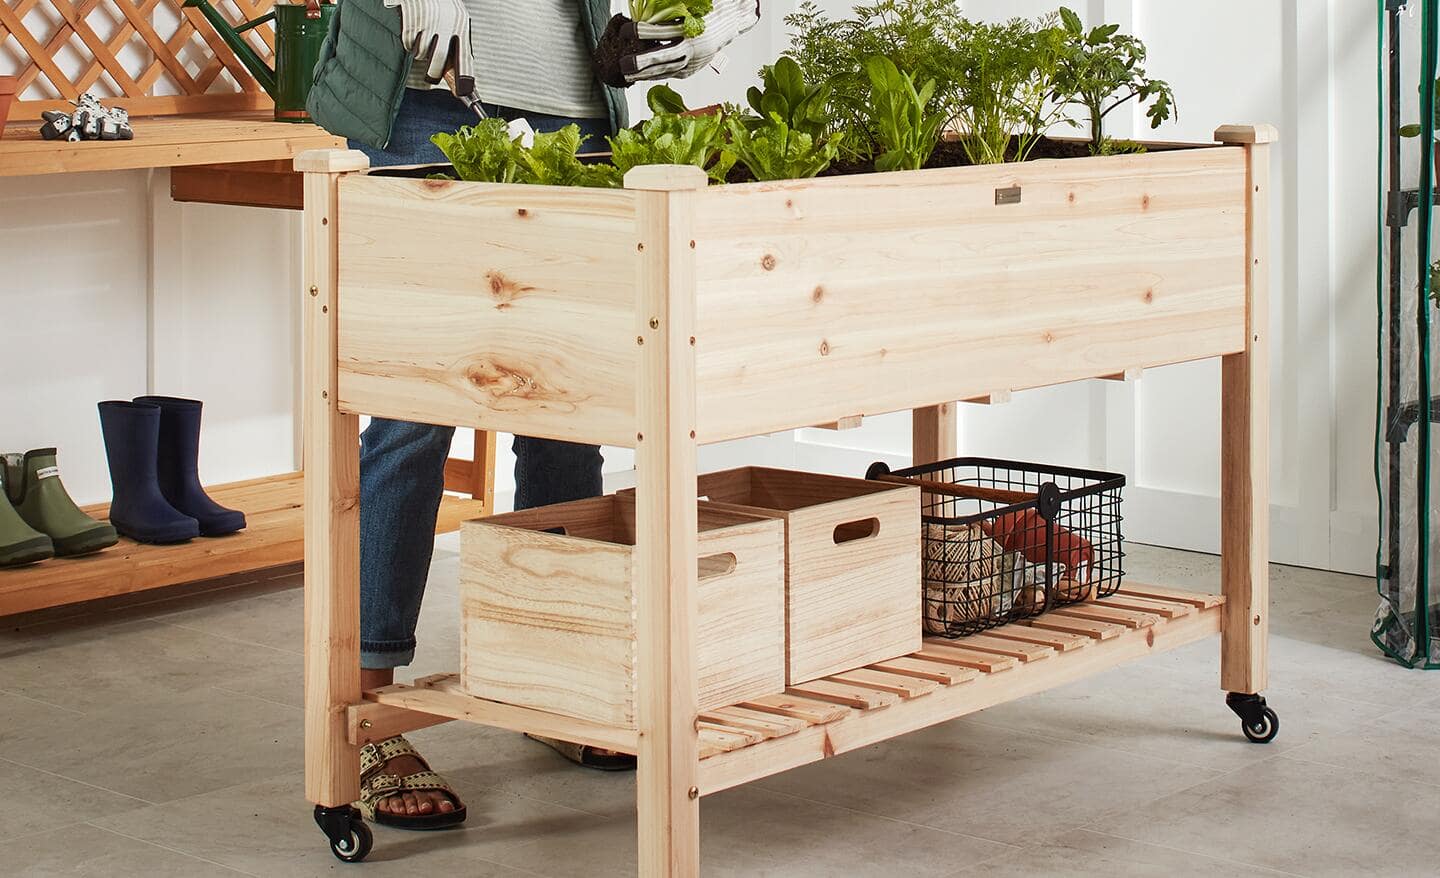 A person standing by a wooden raised garden bed with wheels that's full of lush greenery. 